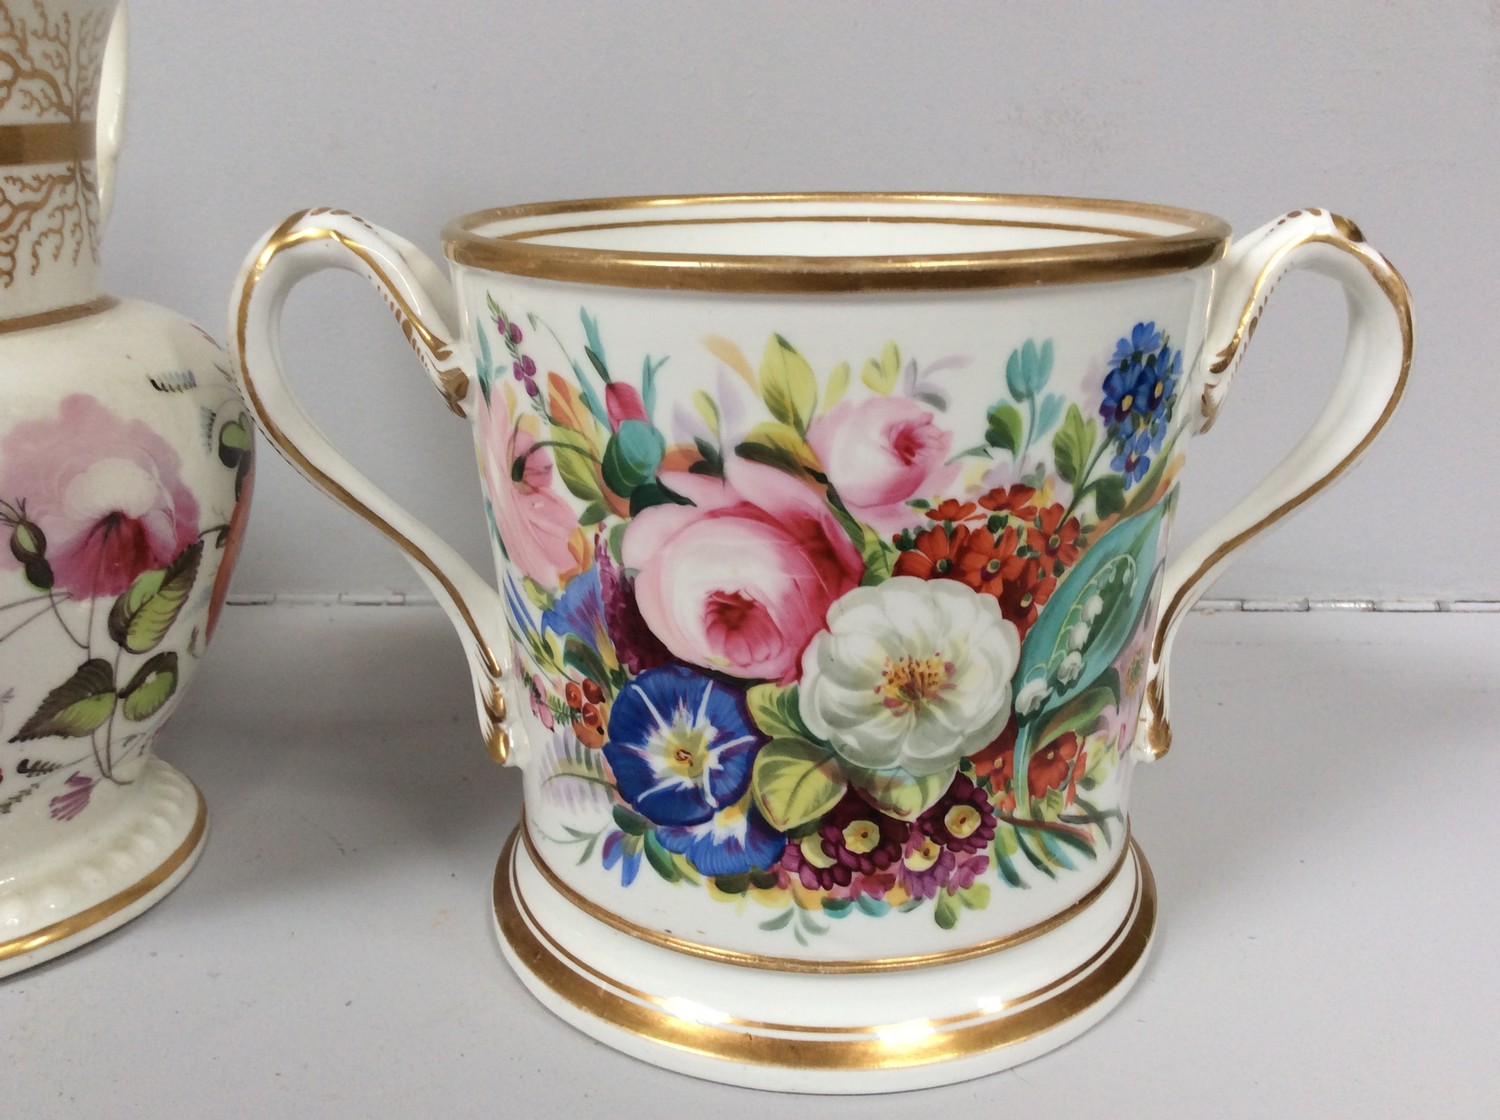 An early 19th century Staffordshire porcelain two-handled loving cup painted with roses and gilt - Image 2 of 5